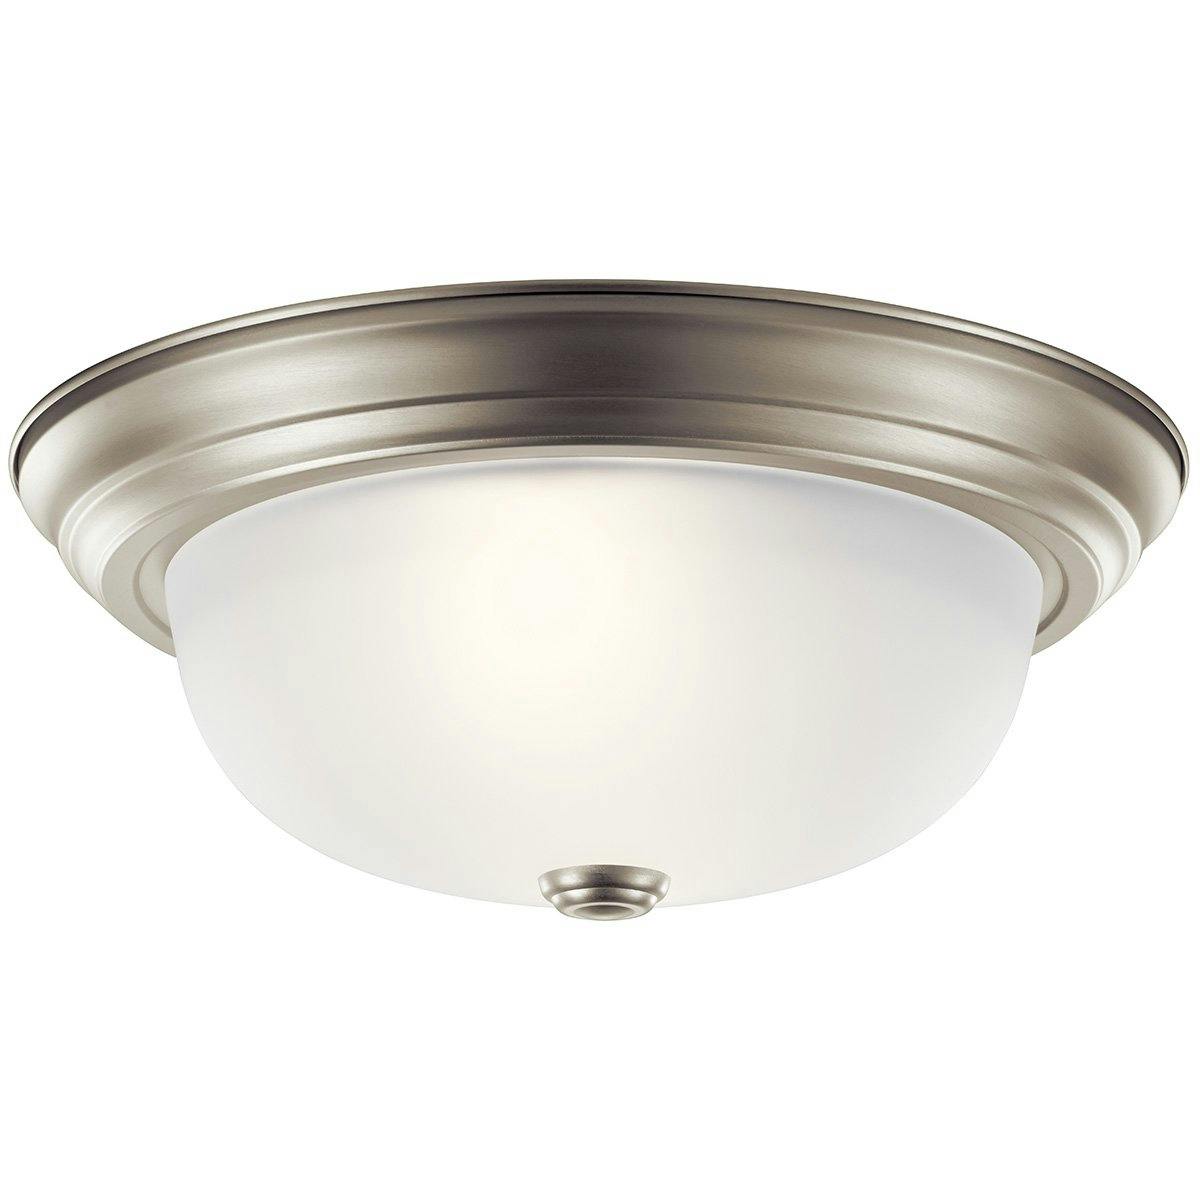 13.25" Ceiling Space Flush Mount Nickel on a white background